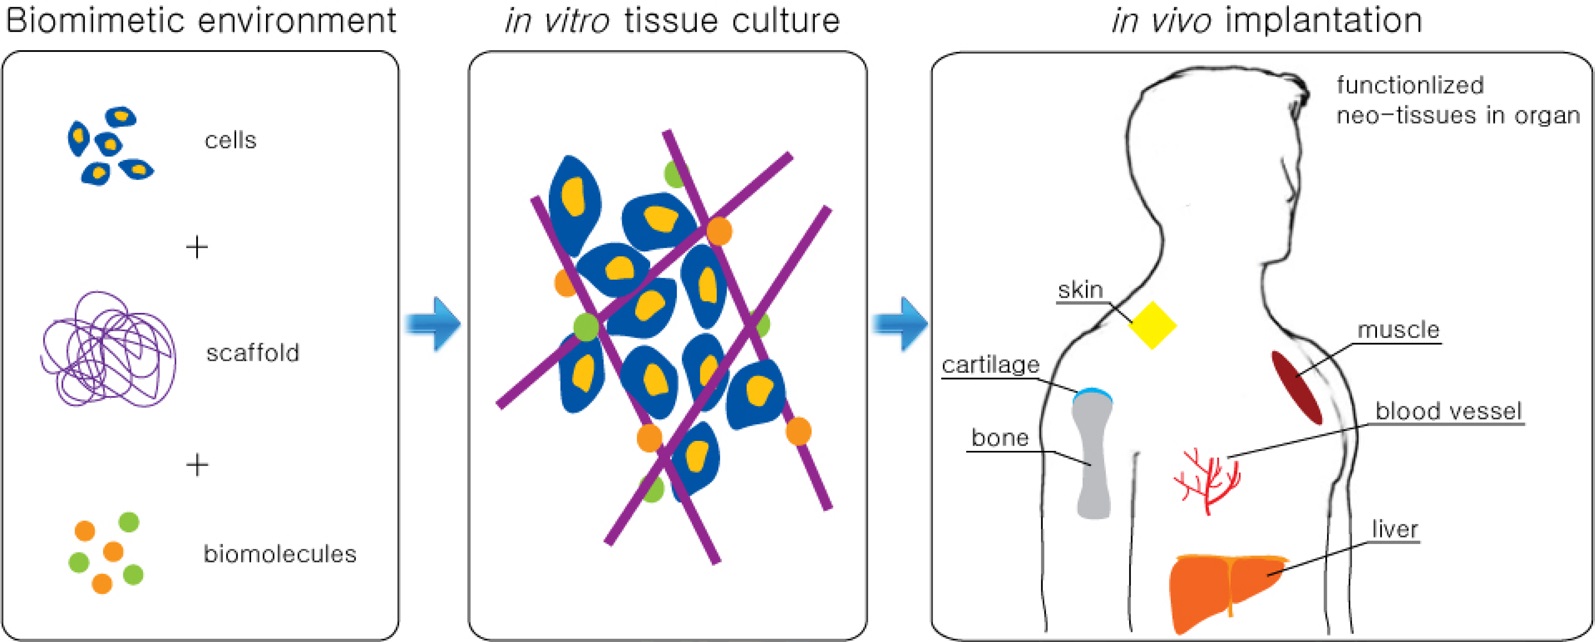 Schematics of one method of typical tissue engineering approaches.